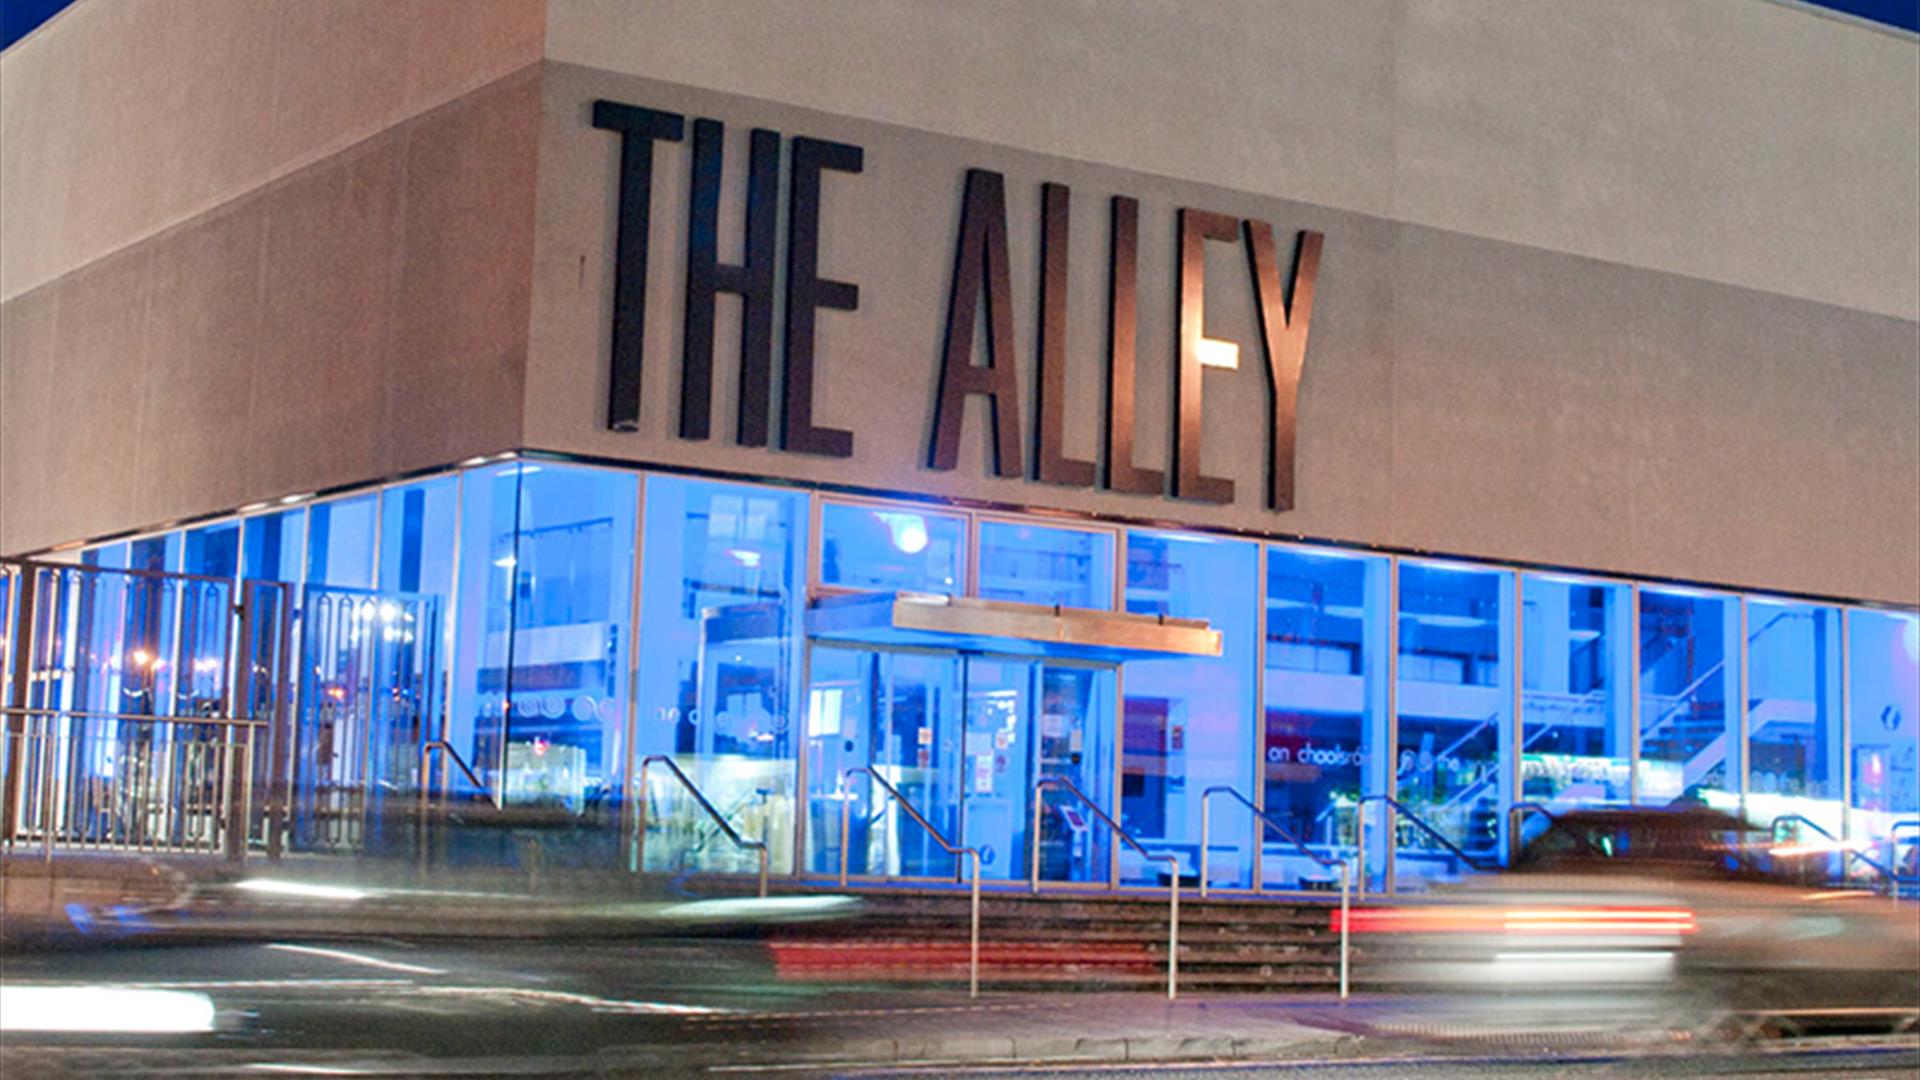 The Alley Theatre exterior